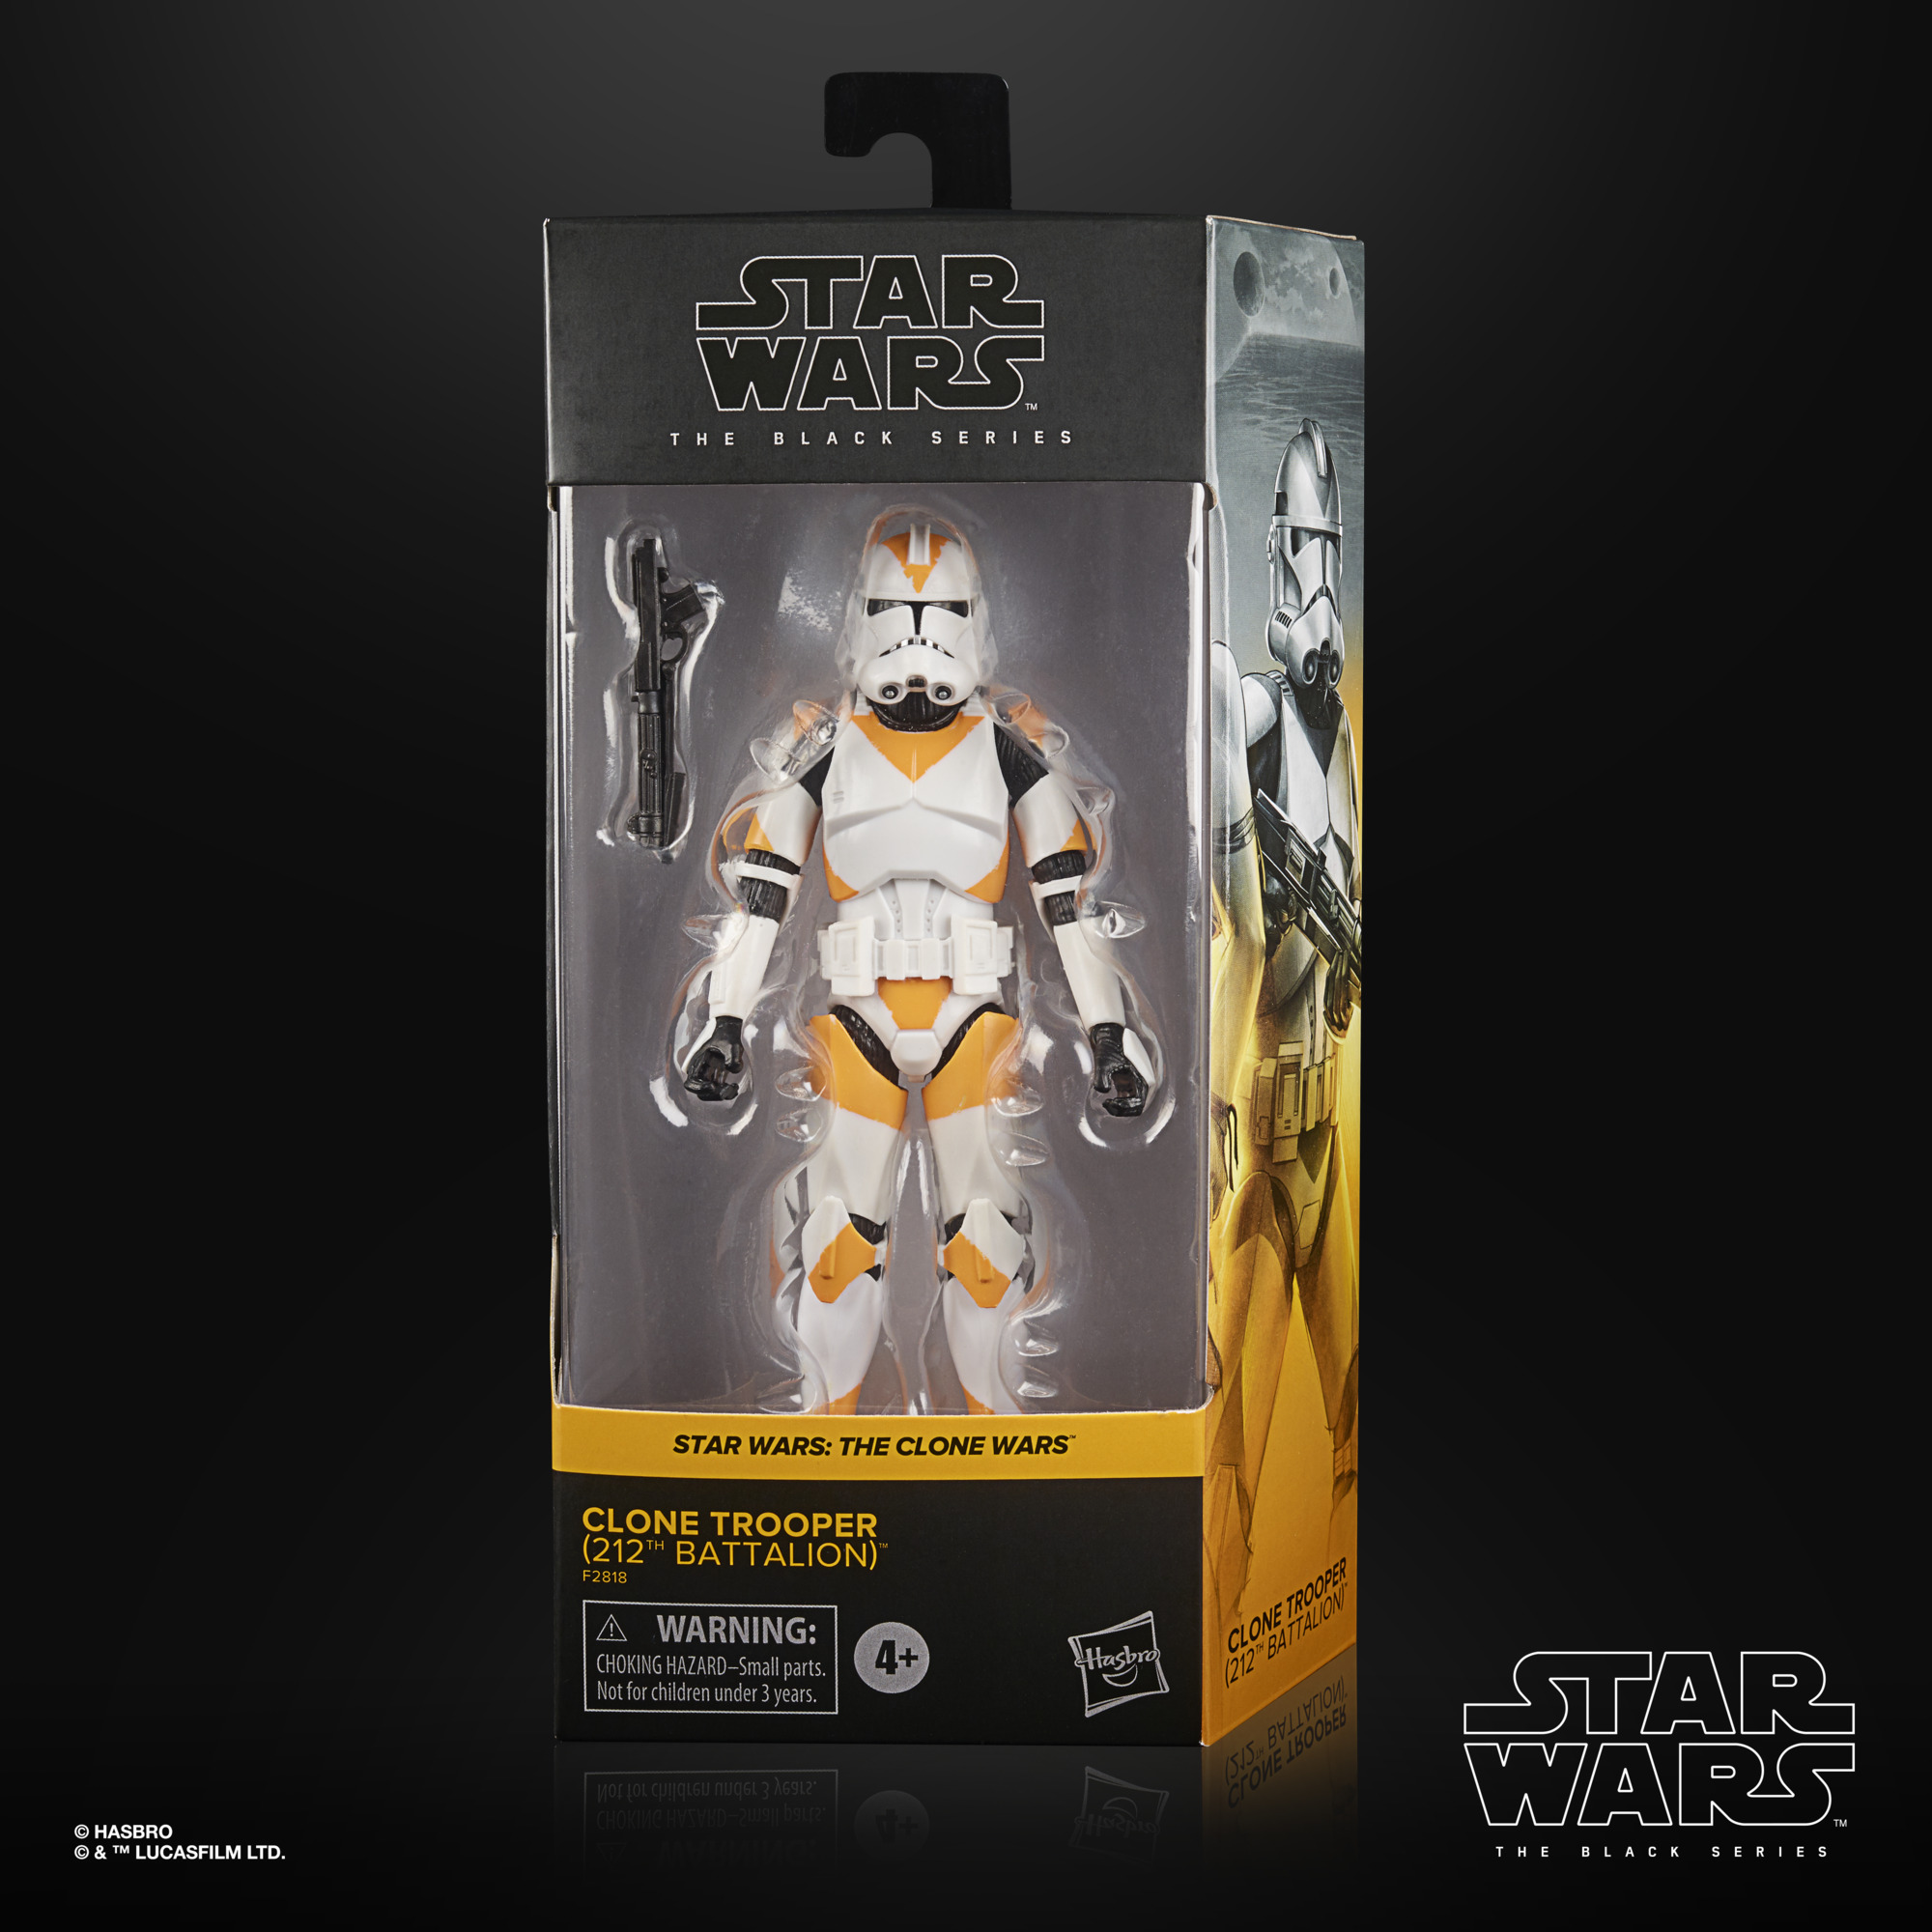 Star Wars Black Series Wave 2 6" Phase I Clone Trooper Action Figure IN STOCK!